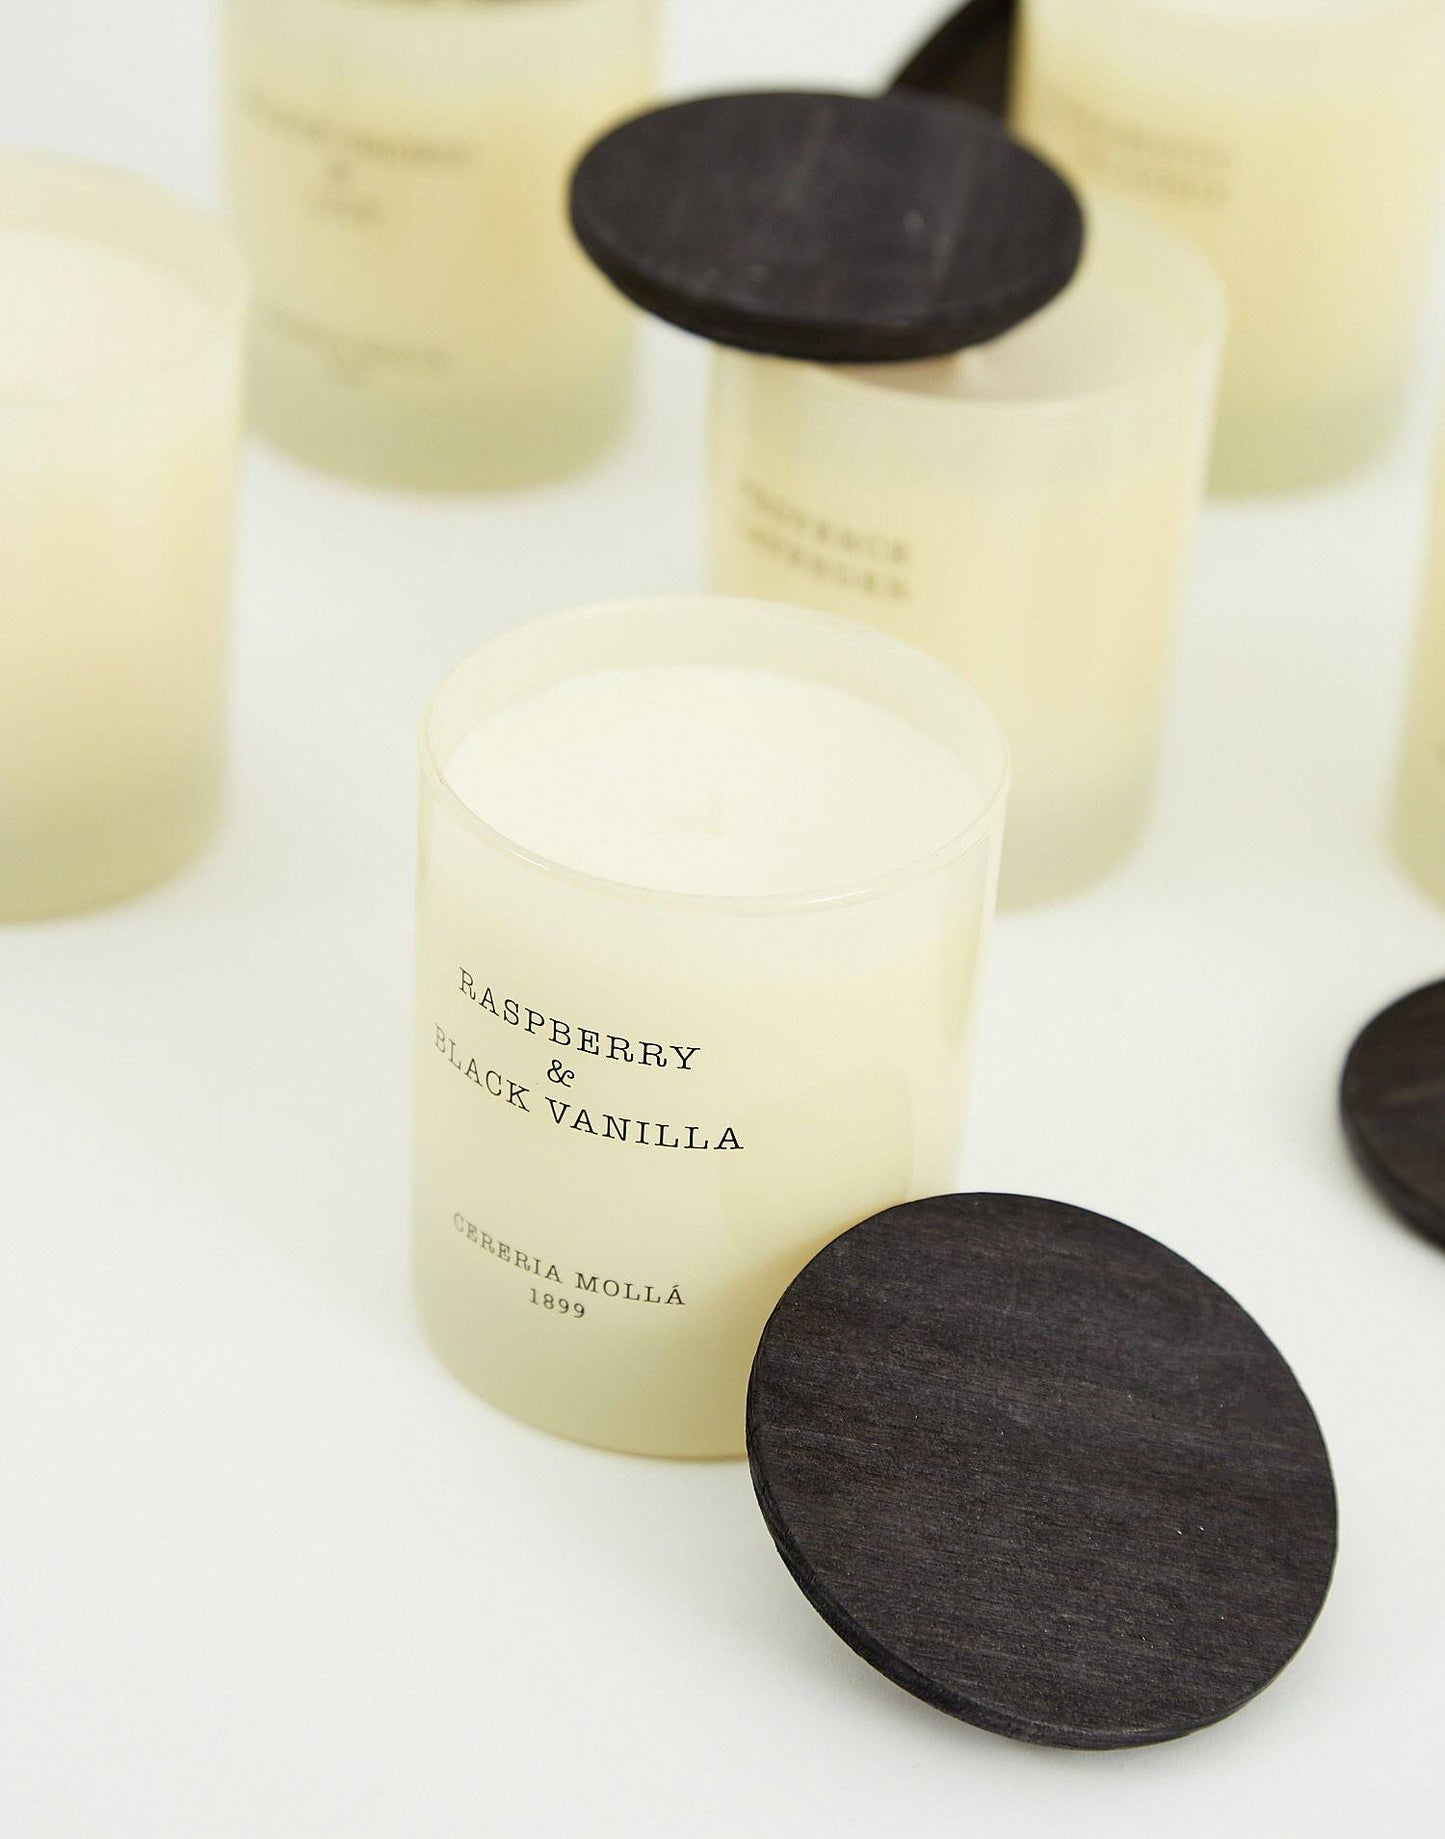 Premium vessel candle with mollá cereing